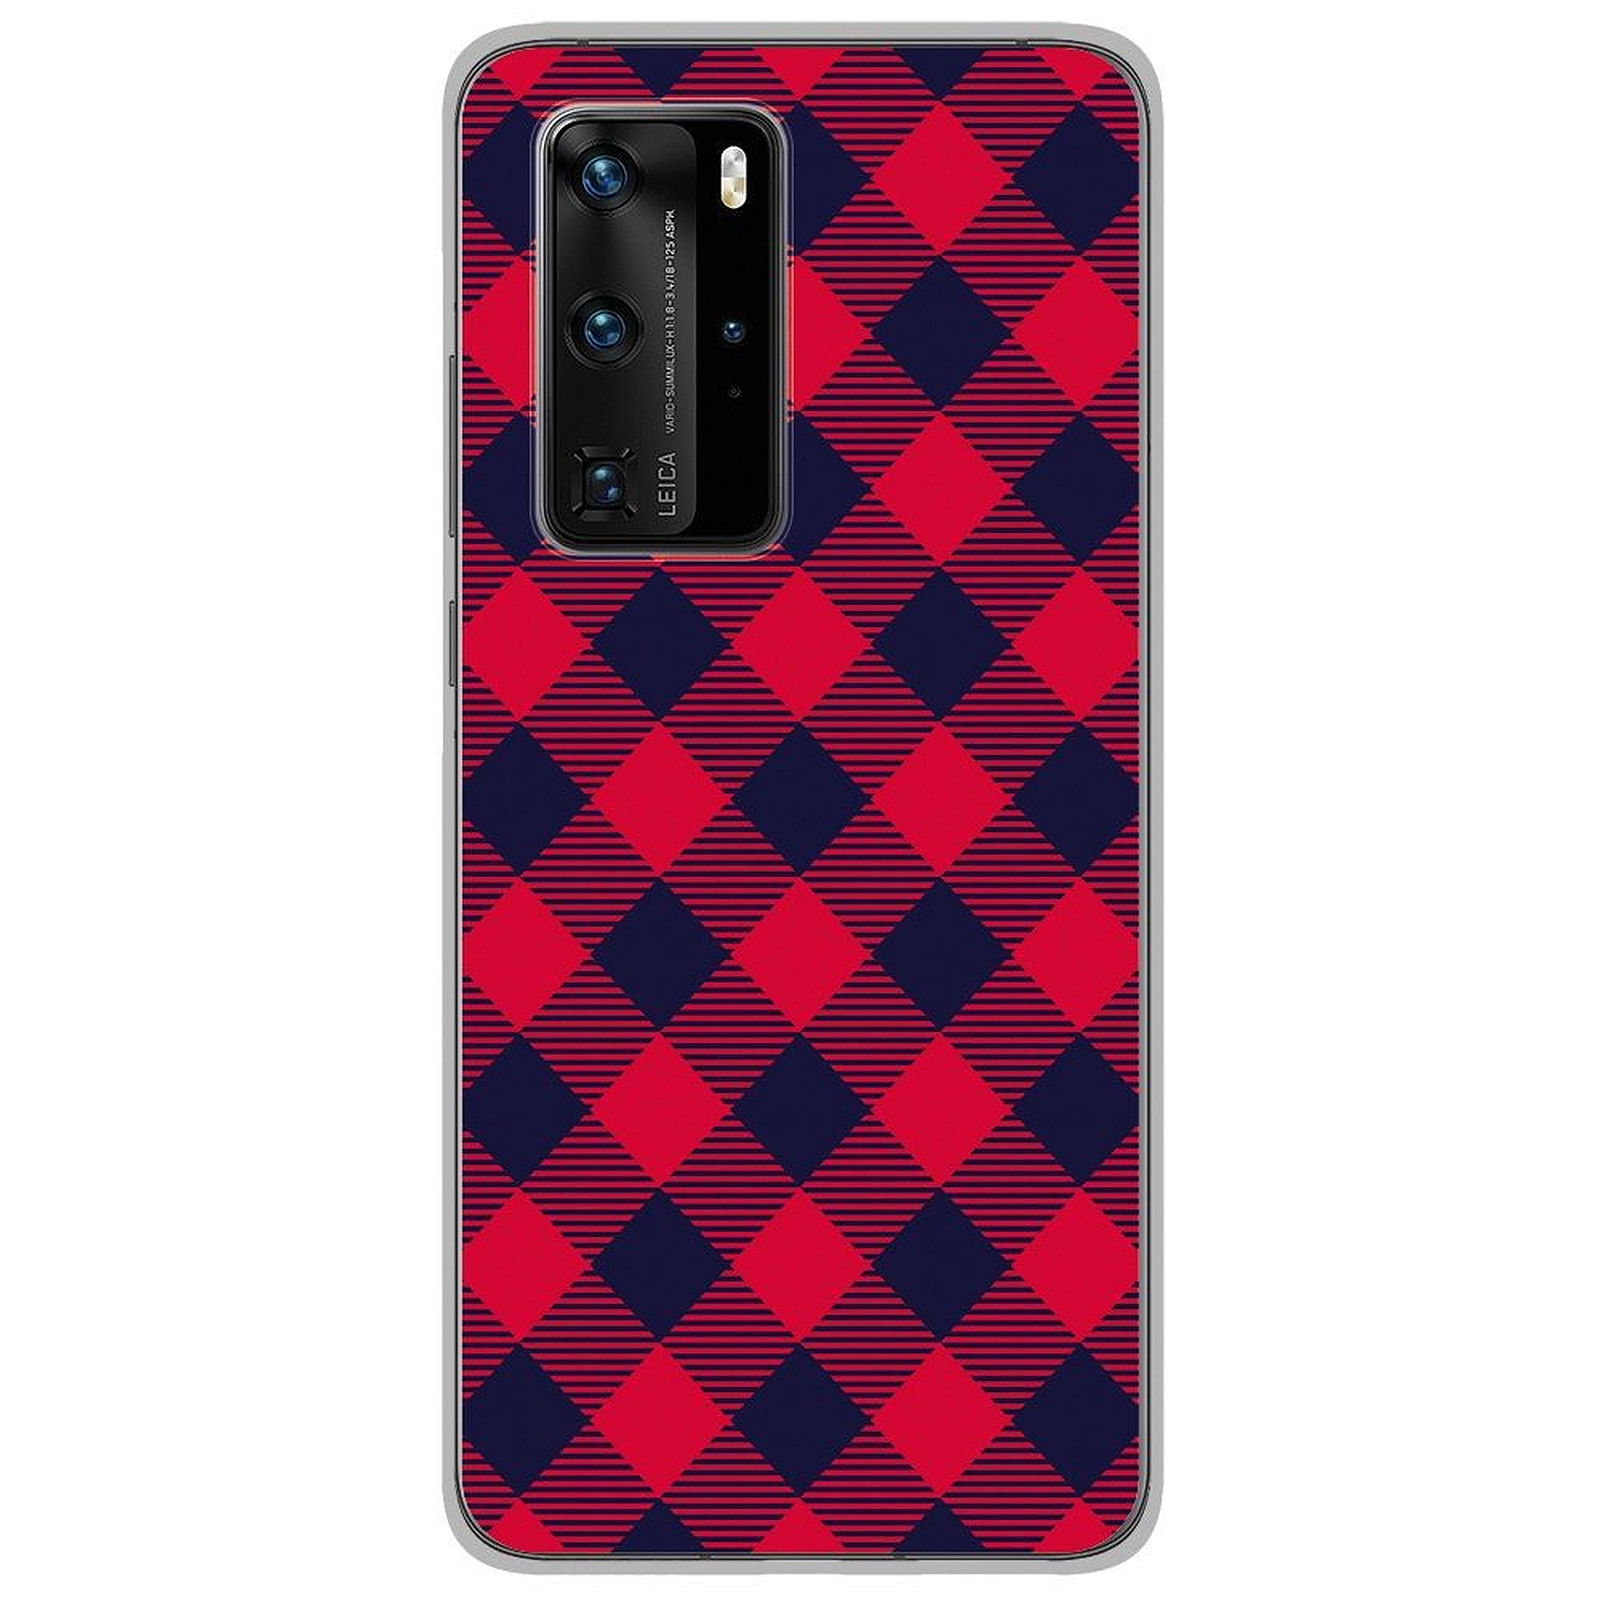 1001 Coques Coque silicone gel Huawei P40 Pro motif Tartan Rouge - Coque telephone 1001Coques